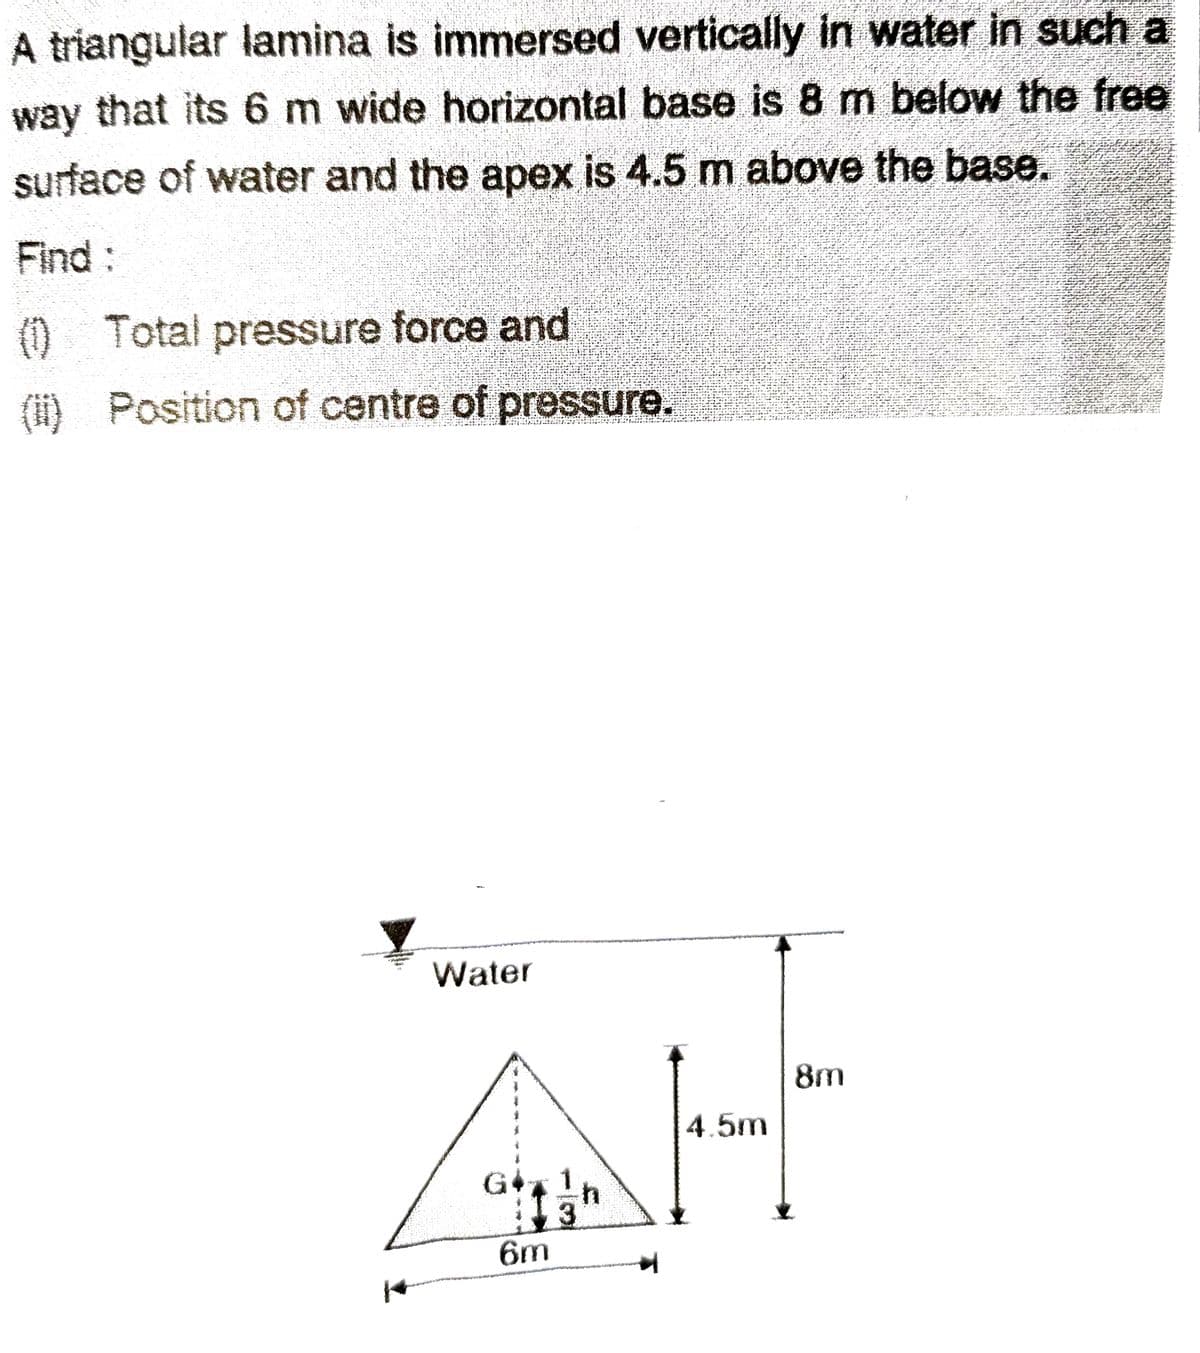 A triangular lamina is immersed vertically in water in such a
way that its 6 m wide horizontal base is 8 m below the free
surface of water and the apex is 4.5 m above the base.
Find :
(1) Total pressure force and
(ii) Position of centre of pressure.
7
Water
G
6m
h
3
4.5m
8m